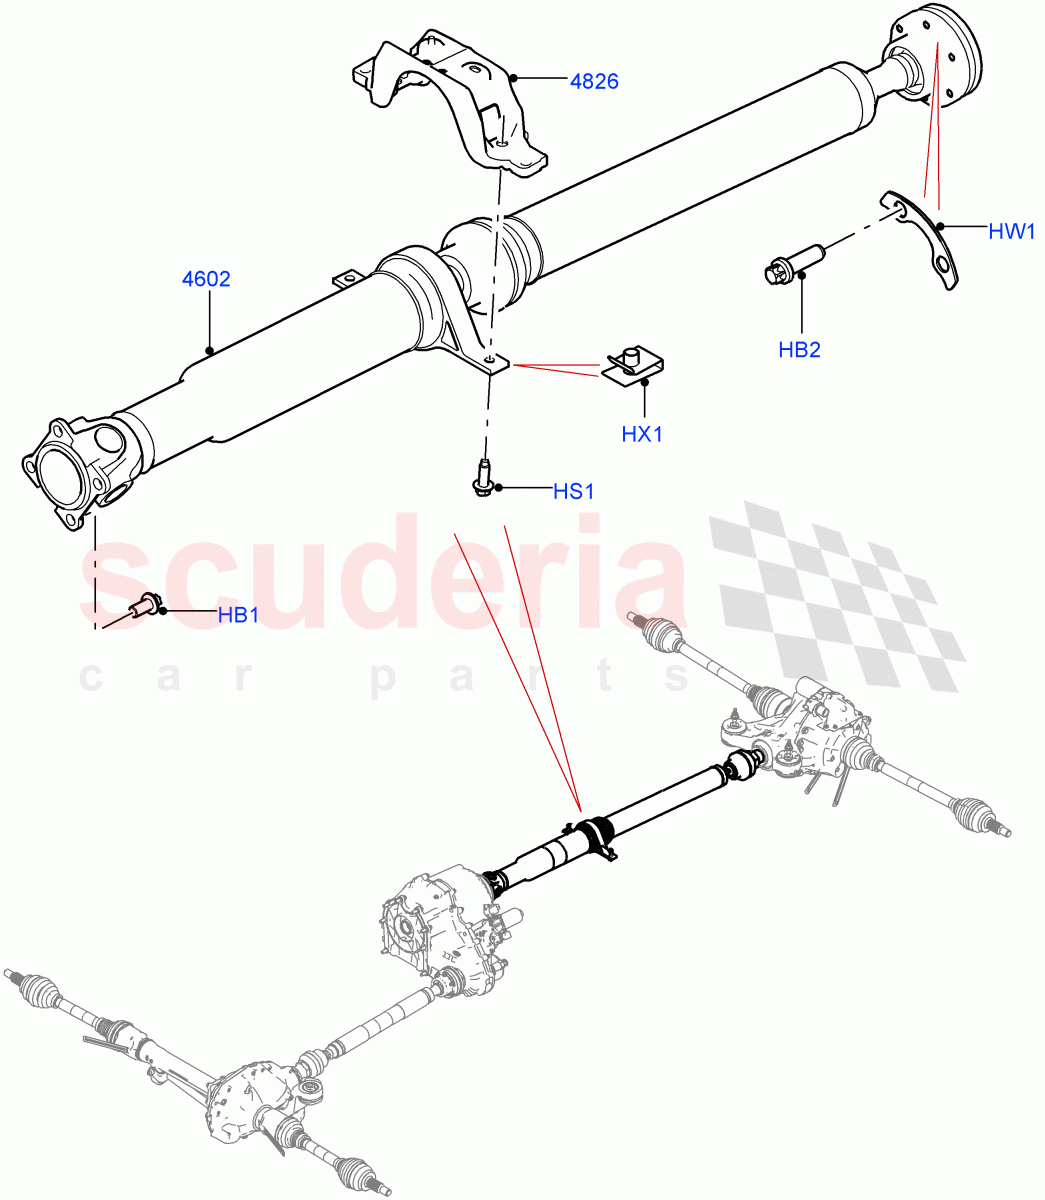 Drive Shaft - Rear Axle Drive(Propshaft)((V)FROMHA000001) of Land Rover Land Rover Range Rover Sport (2014+) [5.0 OHC SGDI SC V8 Petrol]